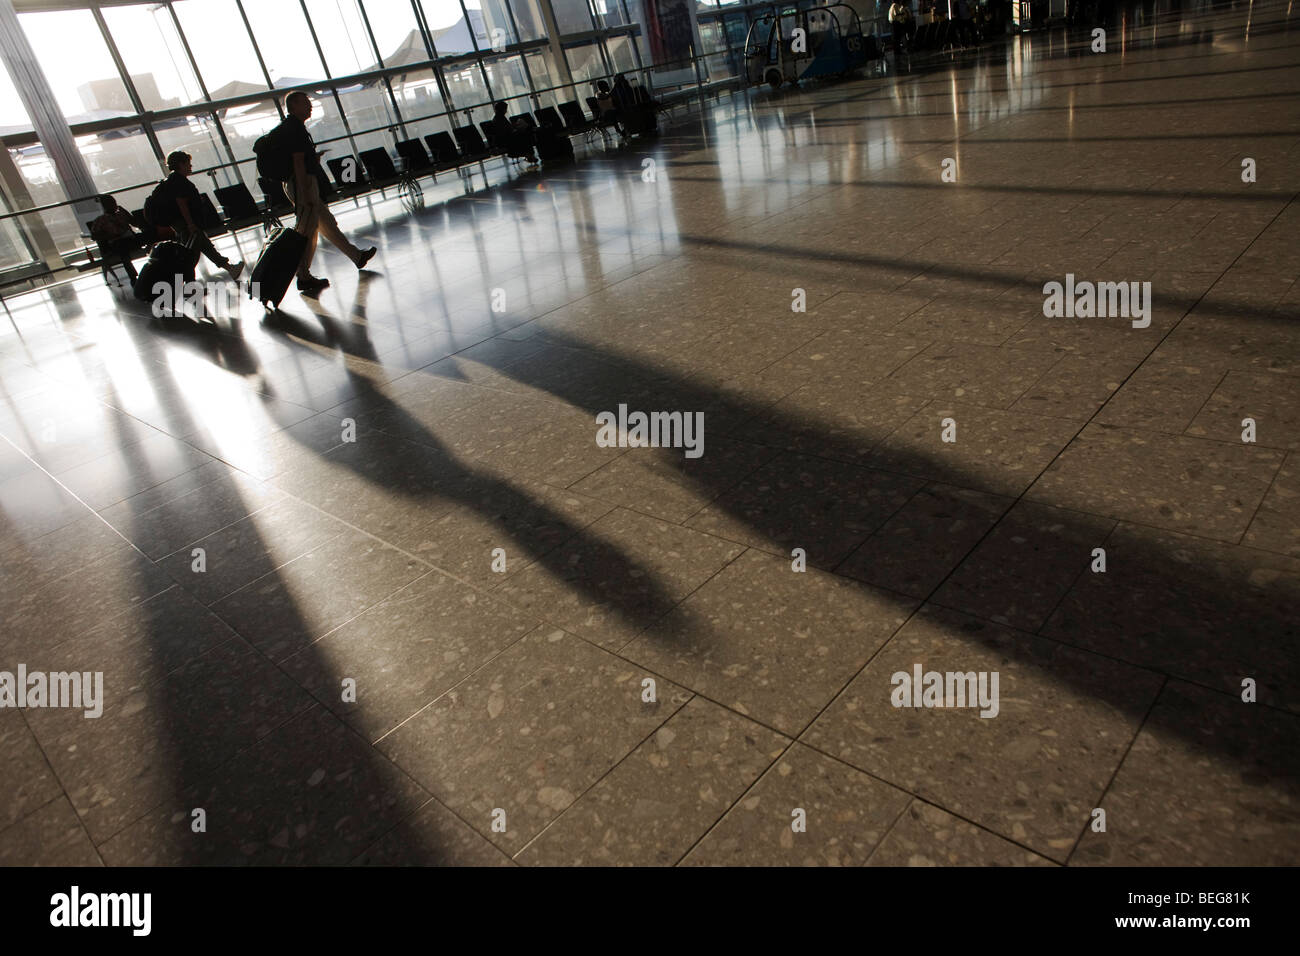 Passengers walk through late sunlight that floods through large windows in departures concourse at Heathrow Airport's T5 Stock Photo